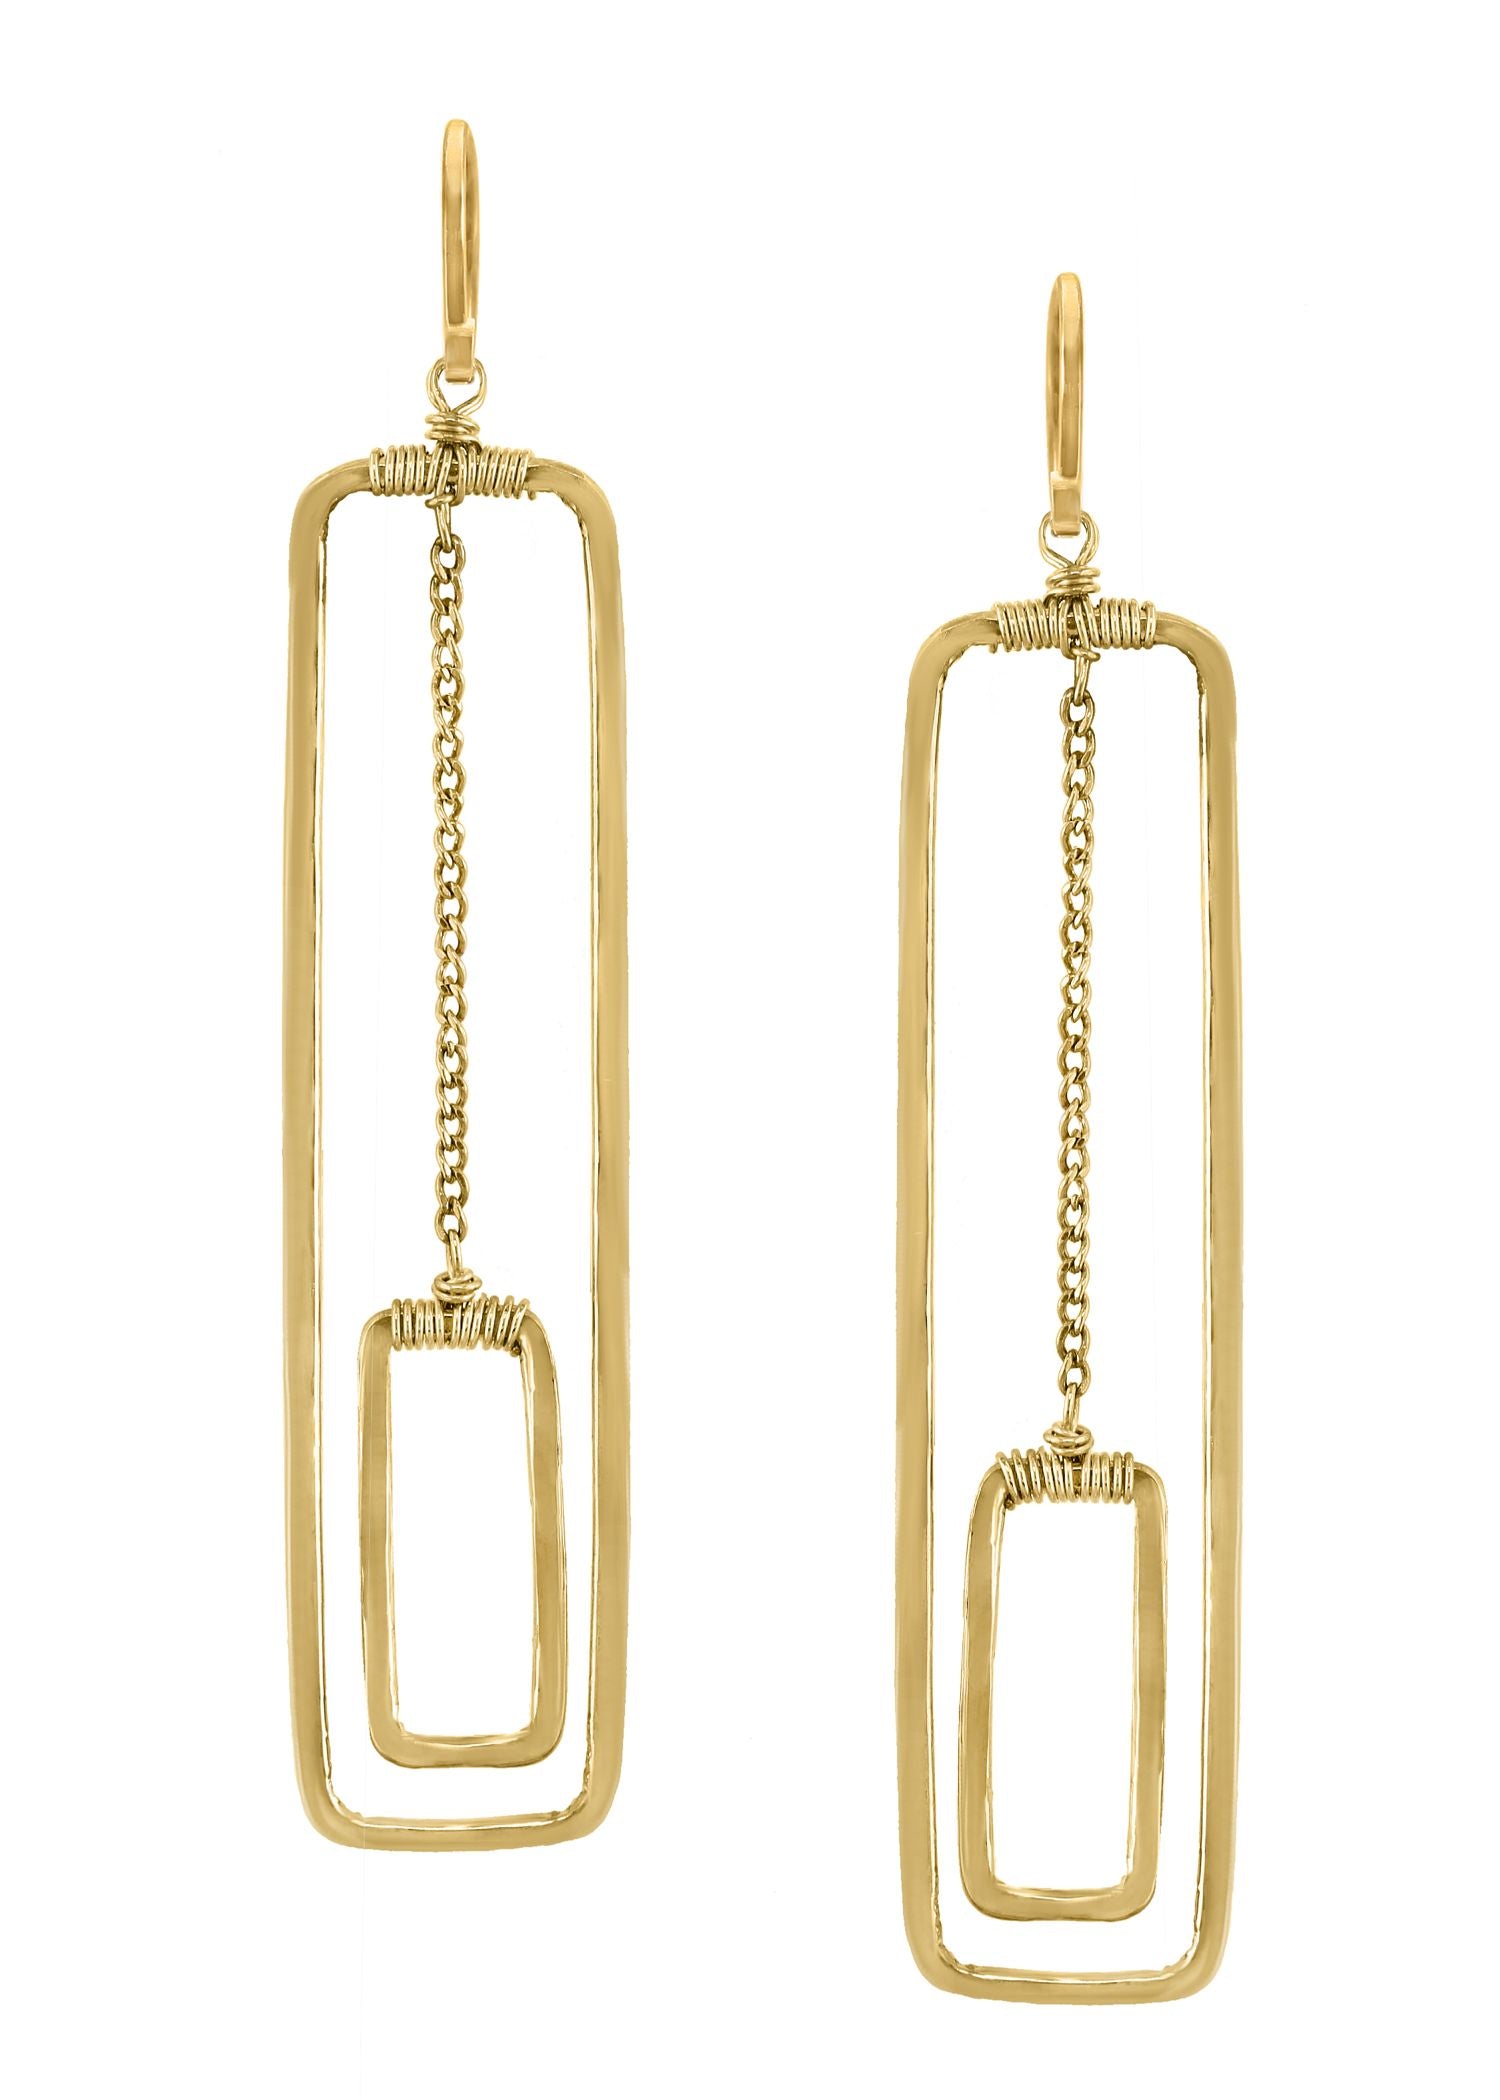 14k gold fill Earrings measure 2-1/4" in length (including the ear wires) and 5/8" in width Handmade in our Los Angeles studio